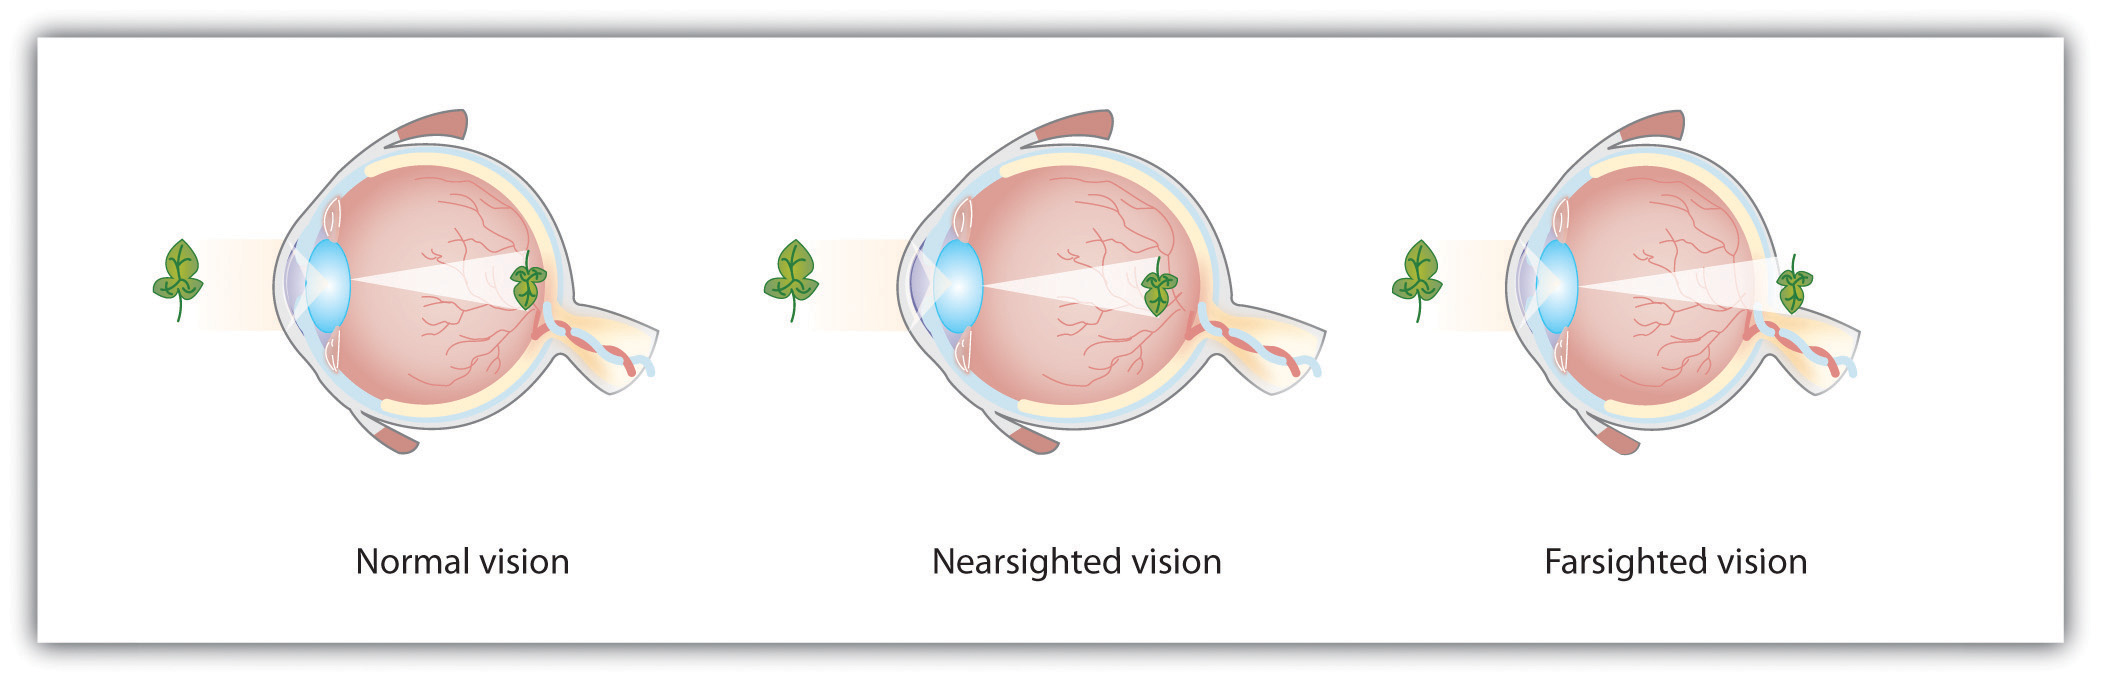 Normal, nearsighted, and farsighted eyes